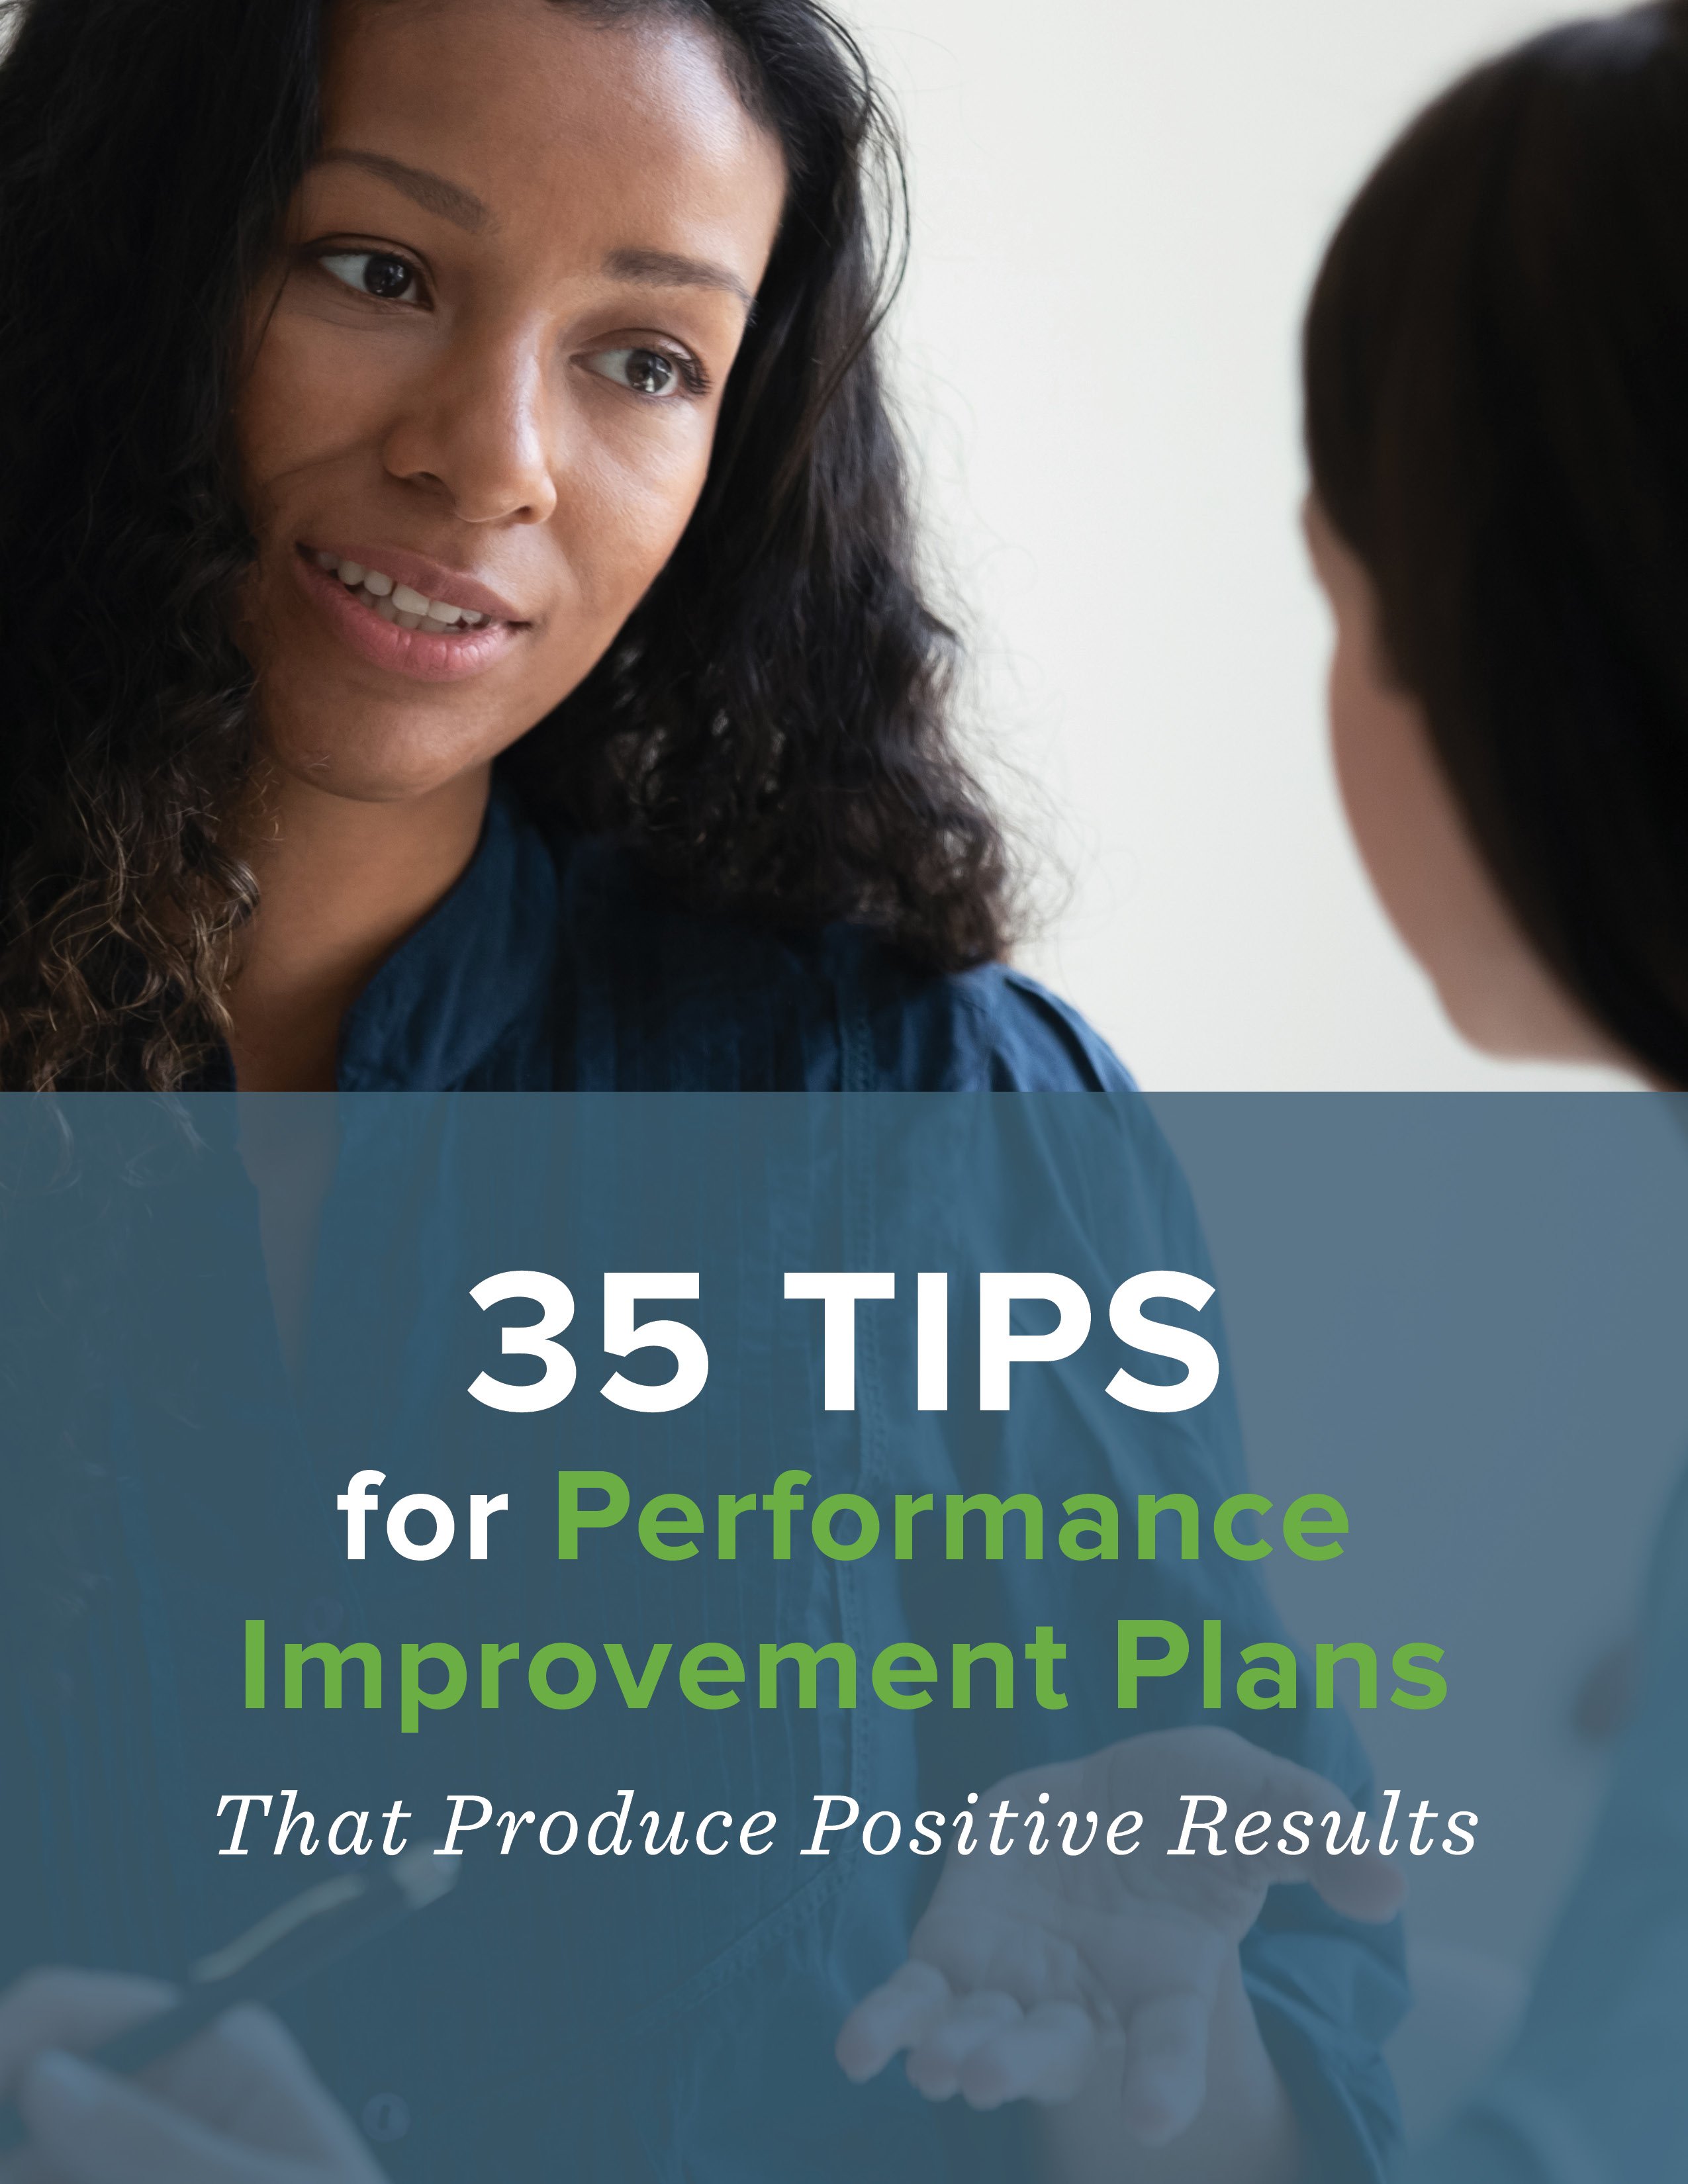 35 Tips for Performance Improvement Plans